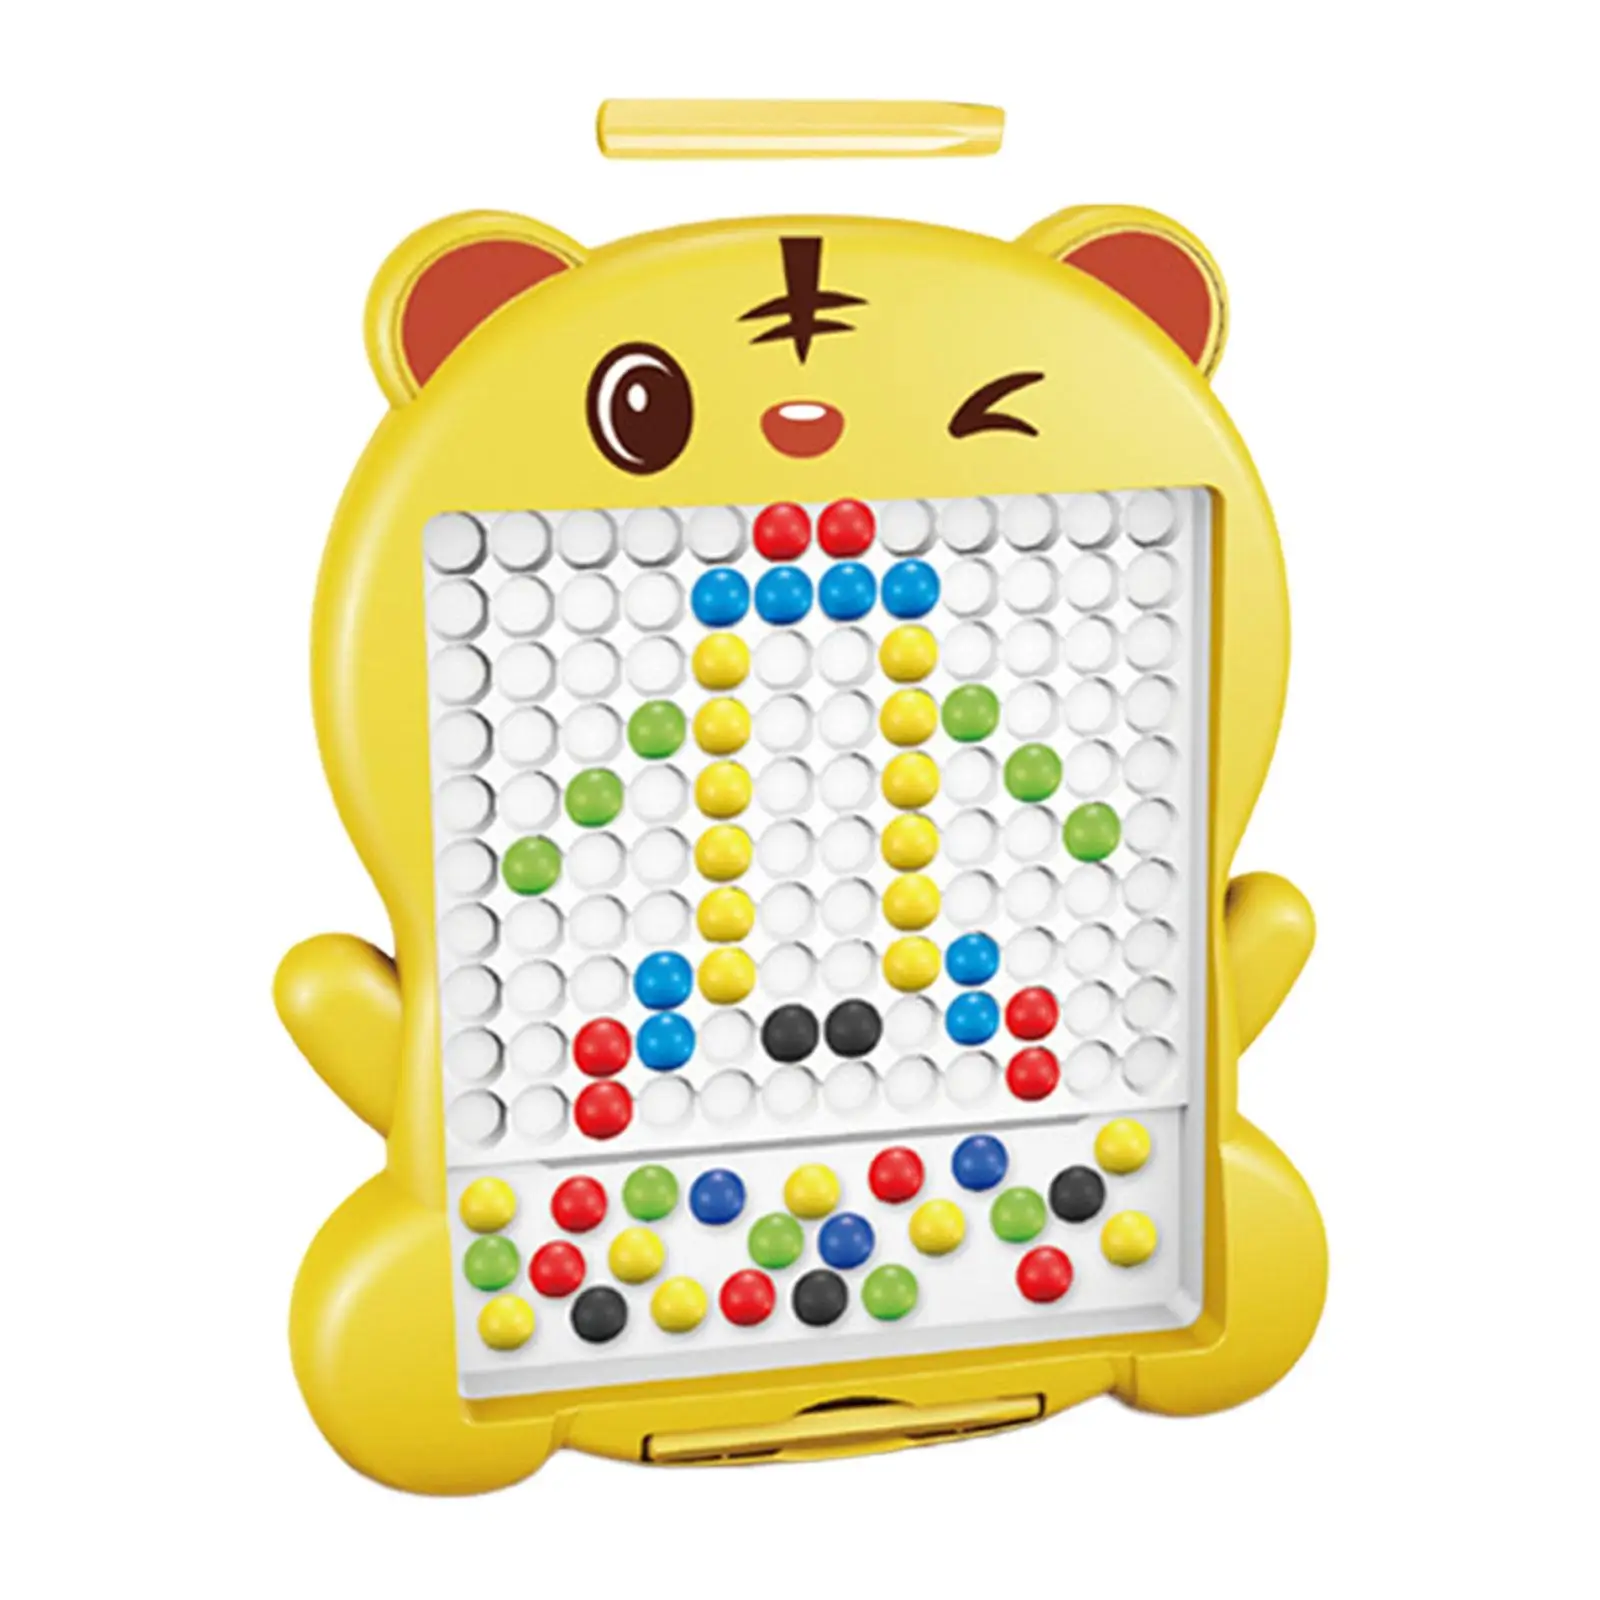 Doodle Board Portable Montessori Toys Drawing Board Dot Toy Painting Board for Preschool Kids Boys Children Birthday Gift